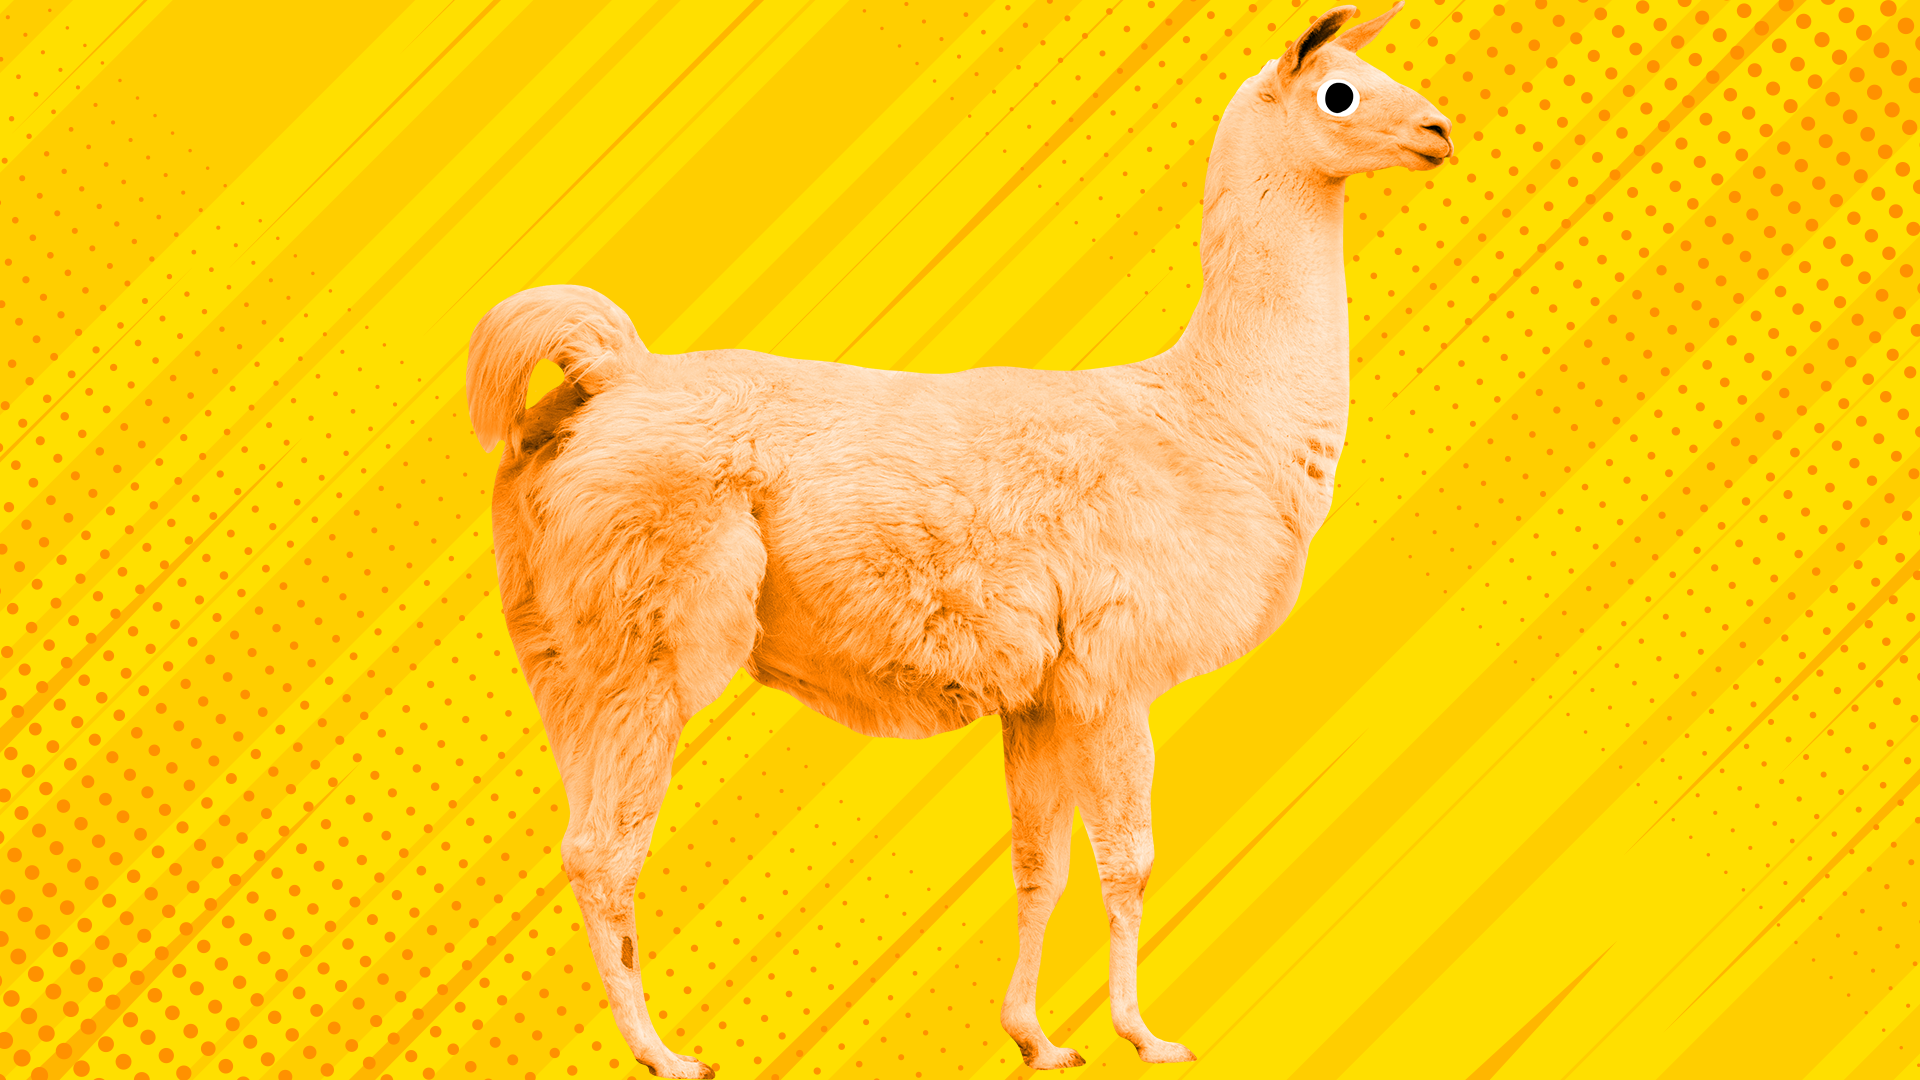 A yellow llama on a yellow background